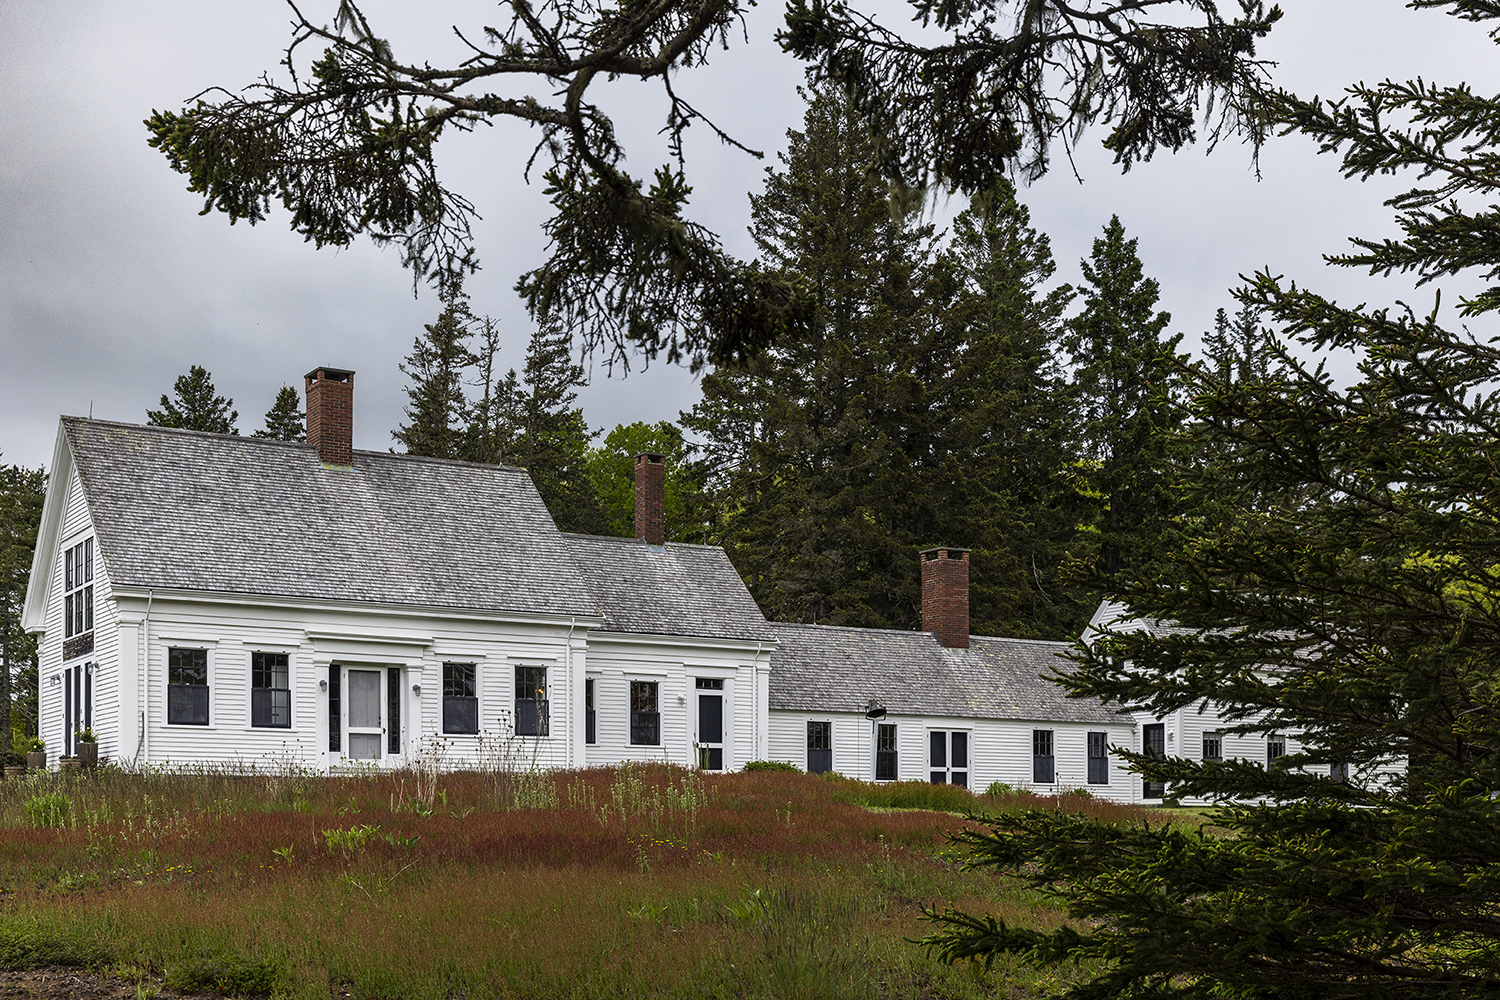 The property features a big house, little house, back house and barn.